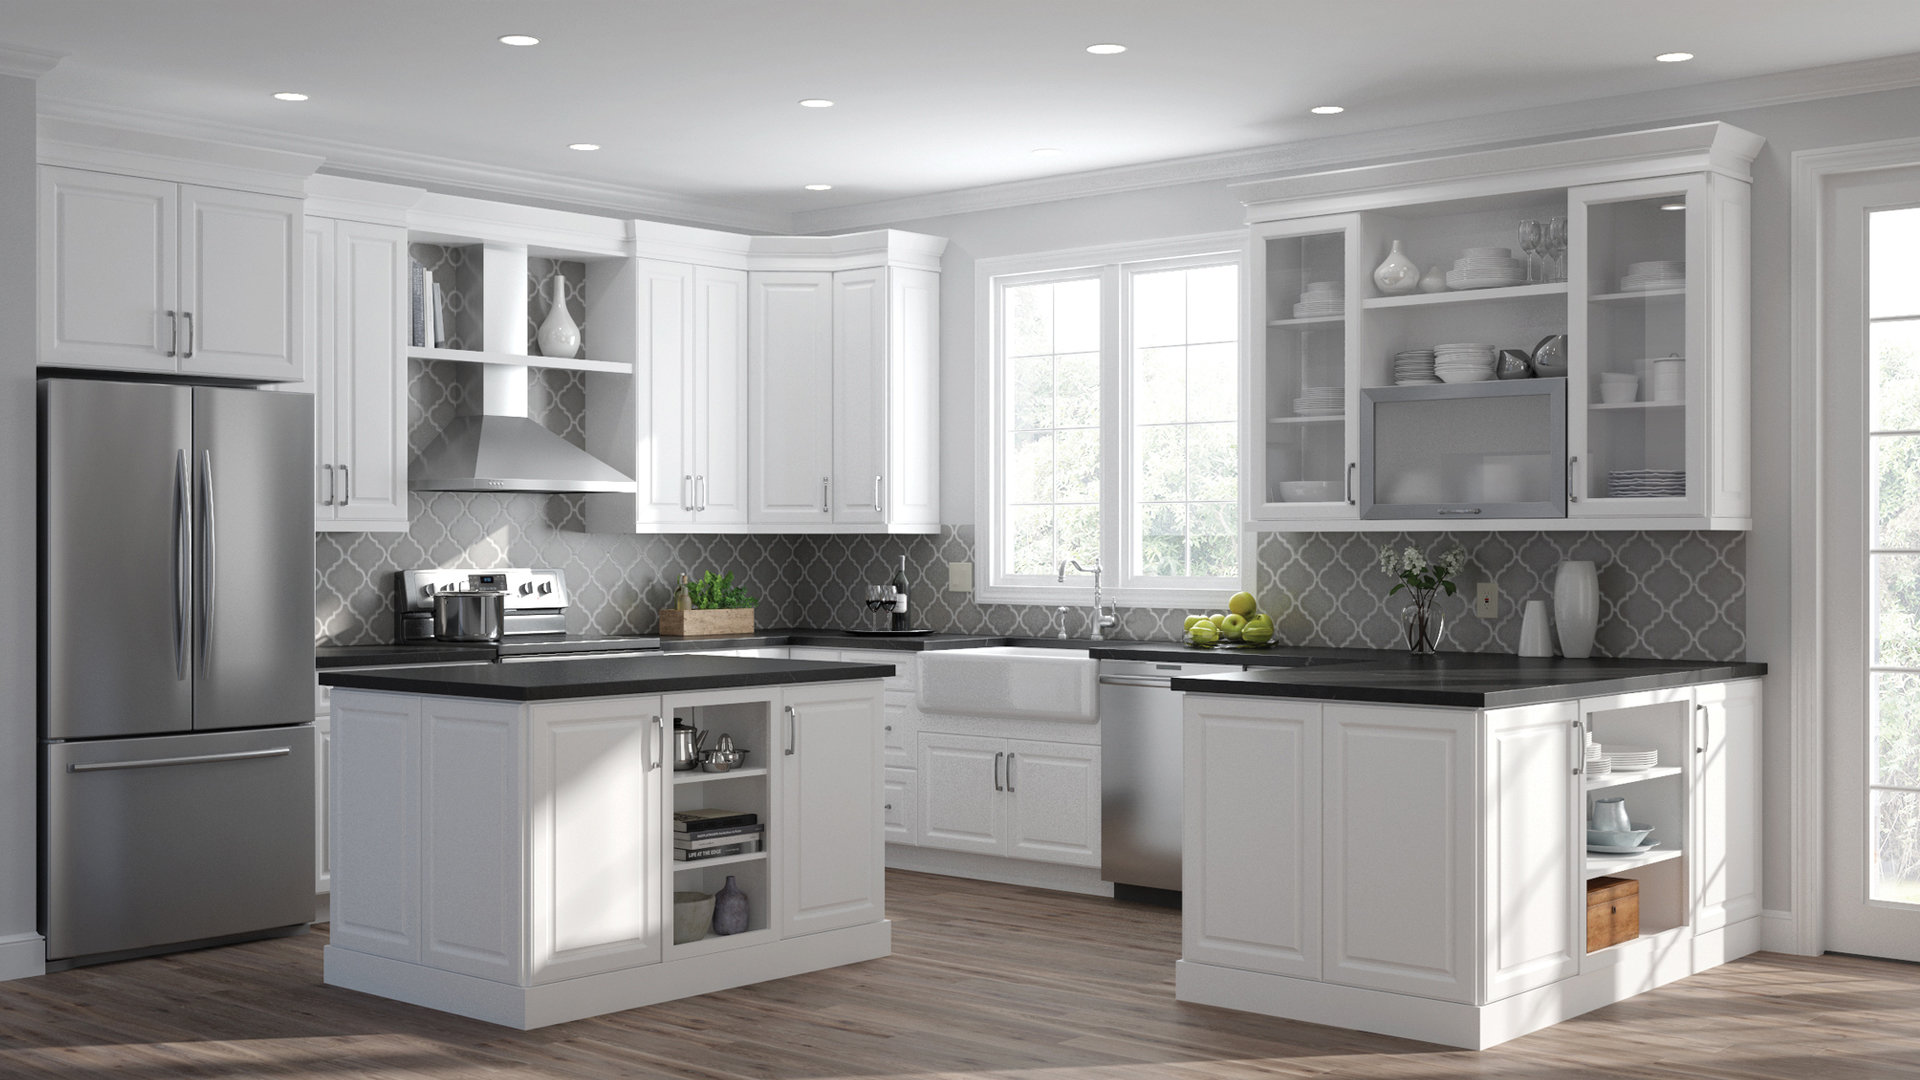 Elgin Base Cabinets In White Kitchen, Home Depot In Stock Cabinets White